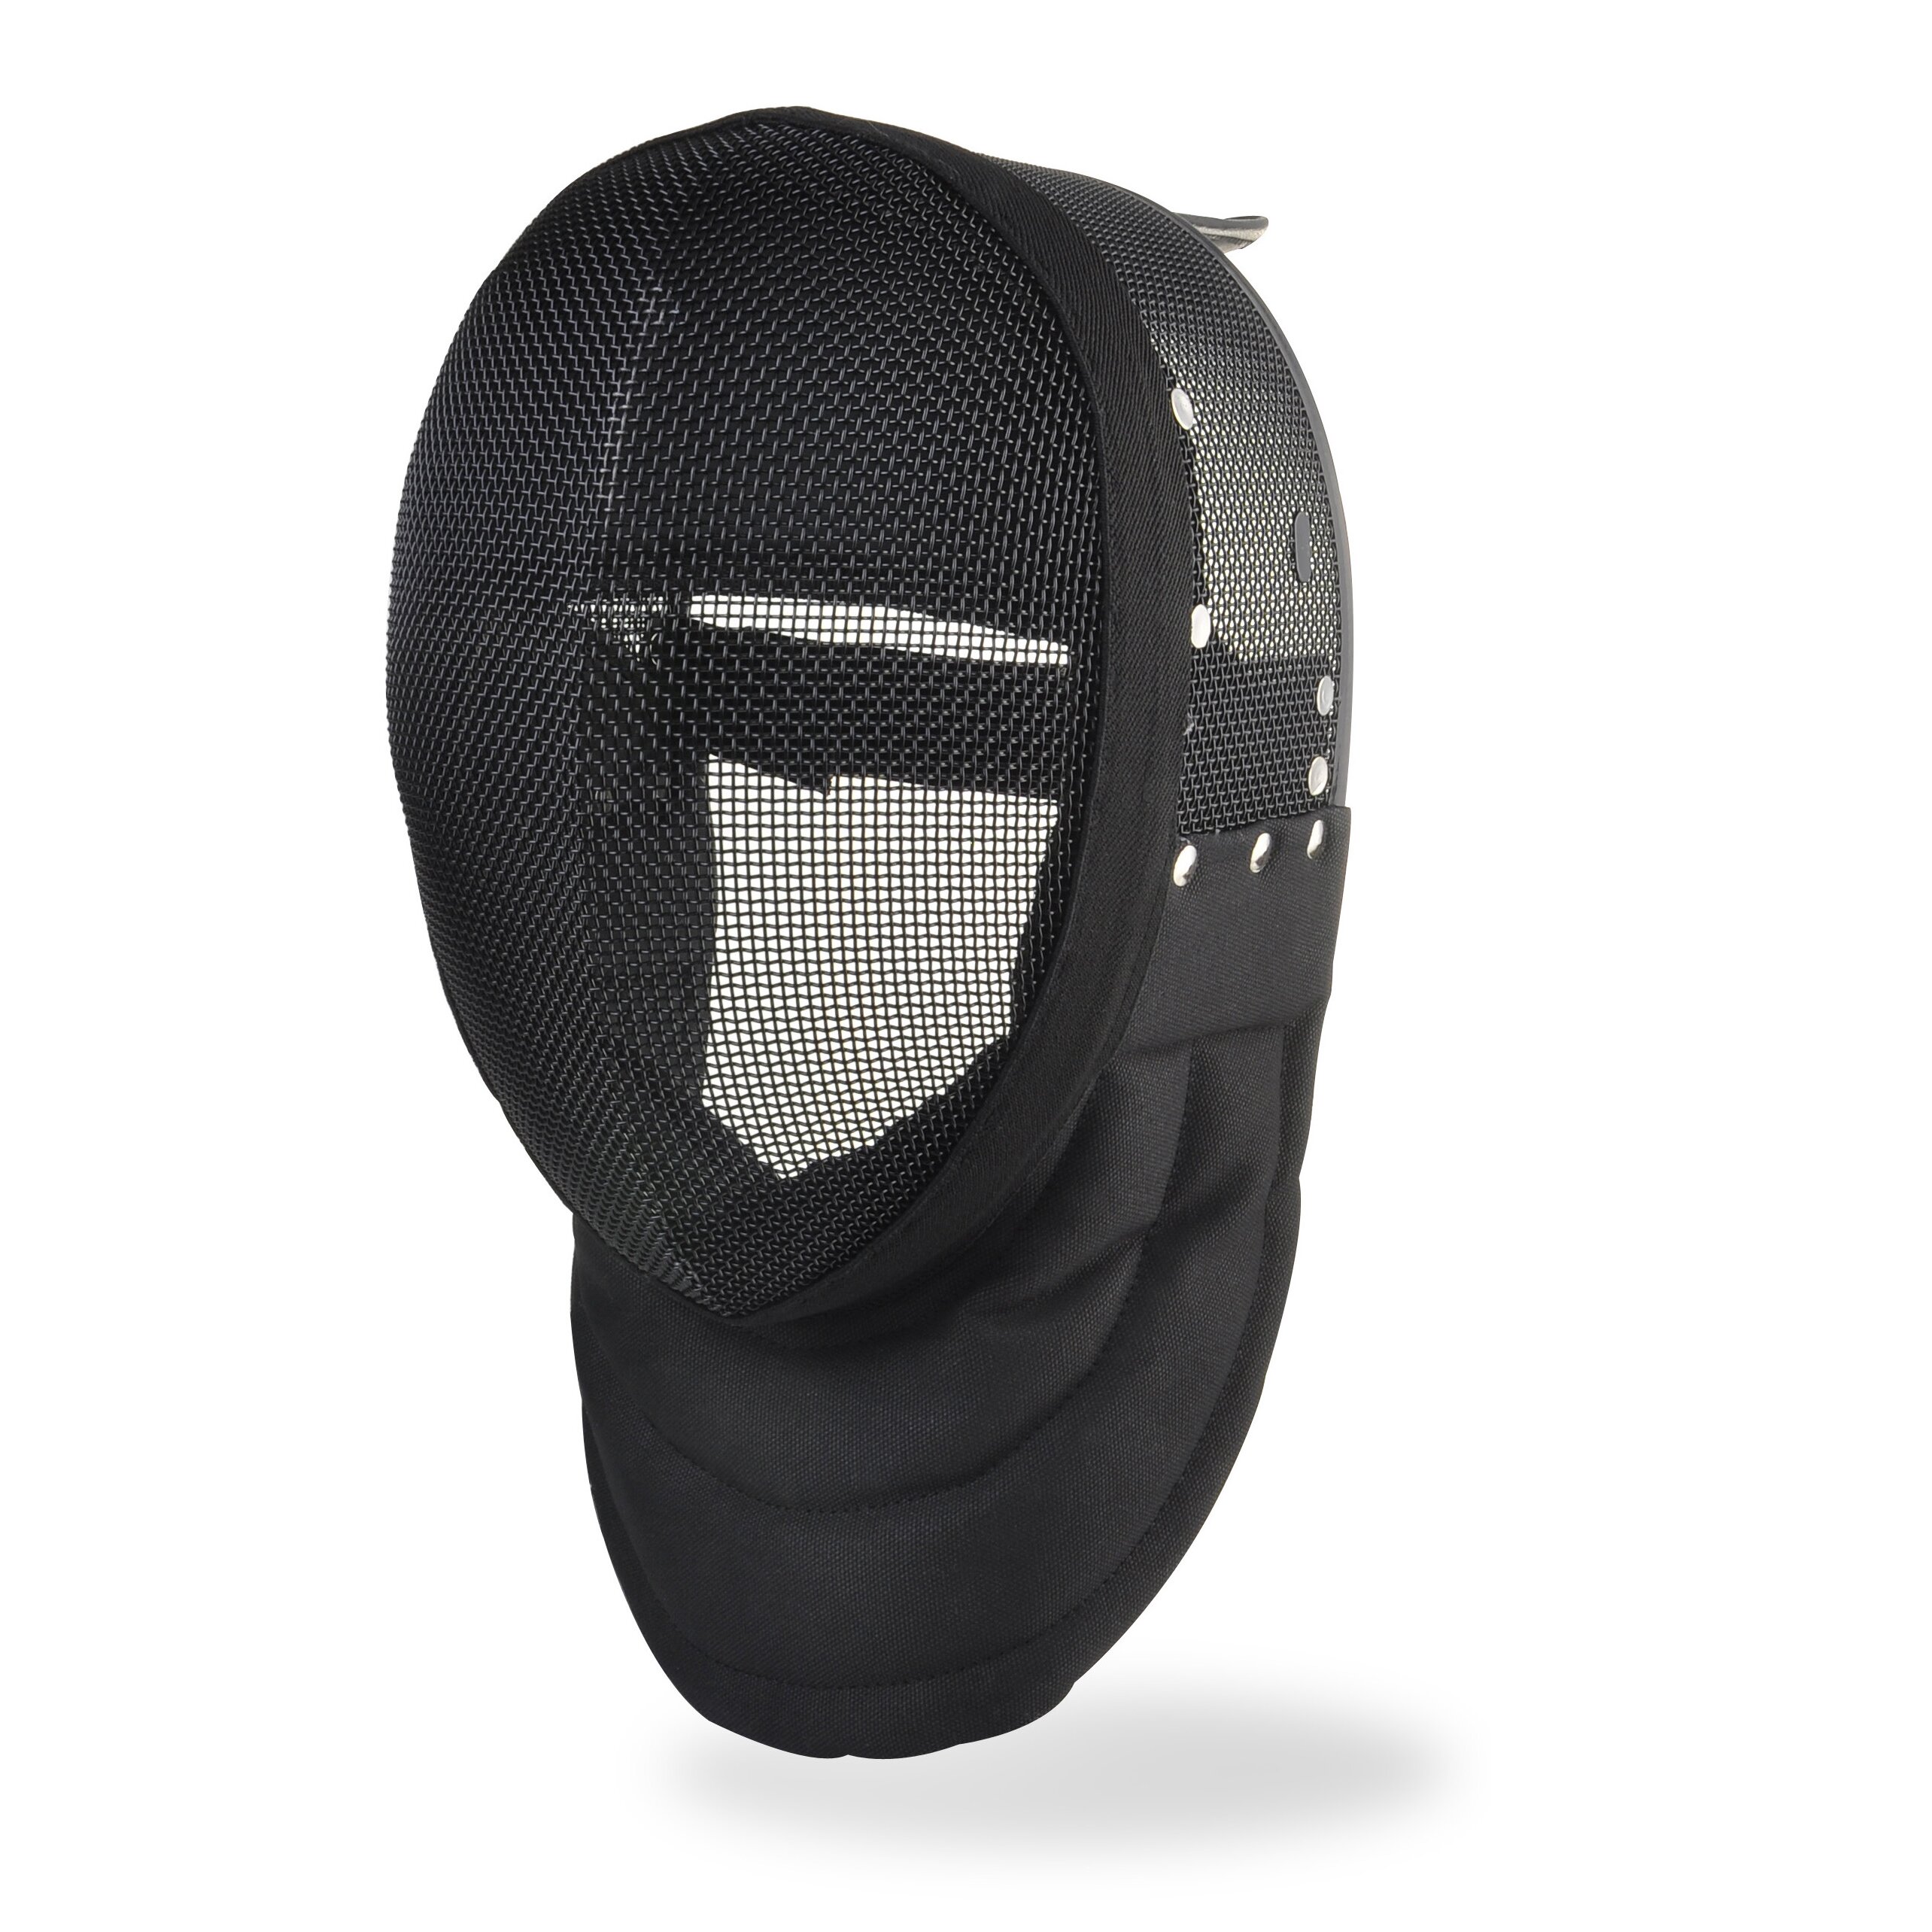 fencing gears, HEMA mask fencing master mask with detachable lining, full black 350NW, fencing equipments and products